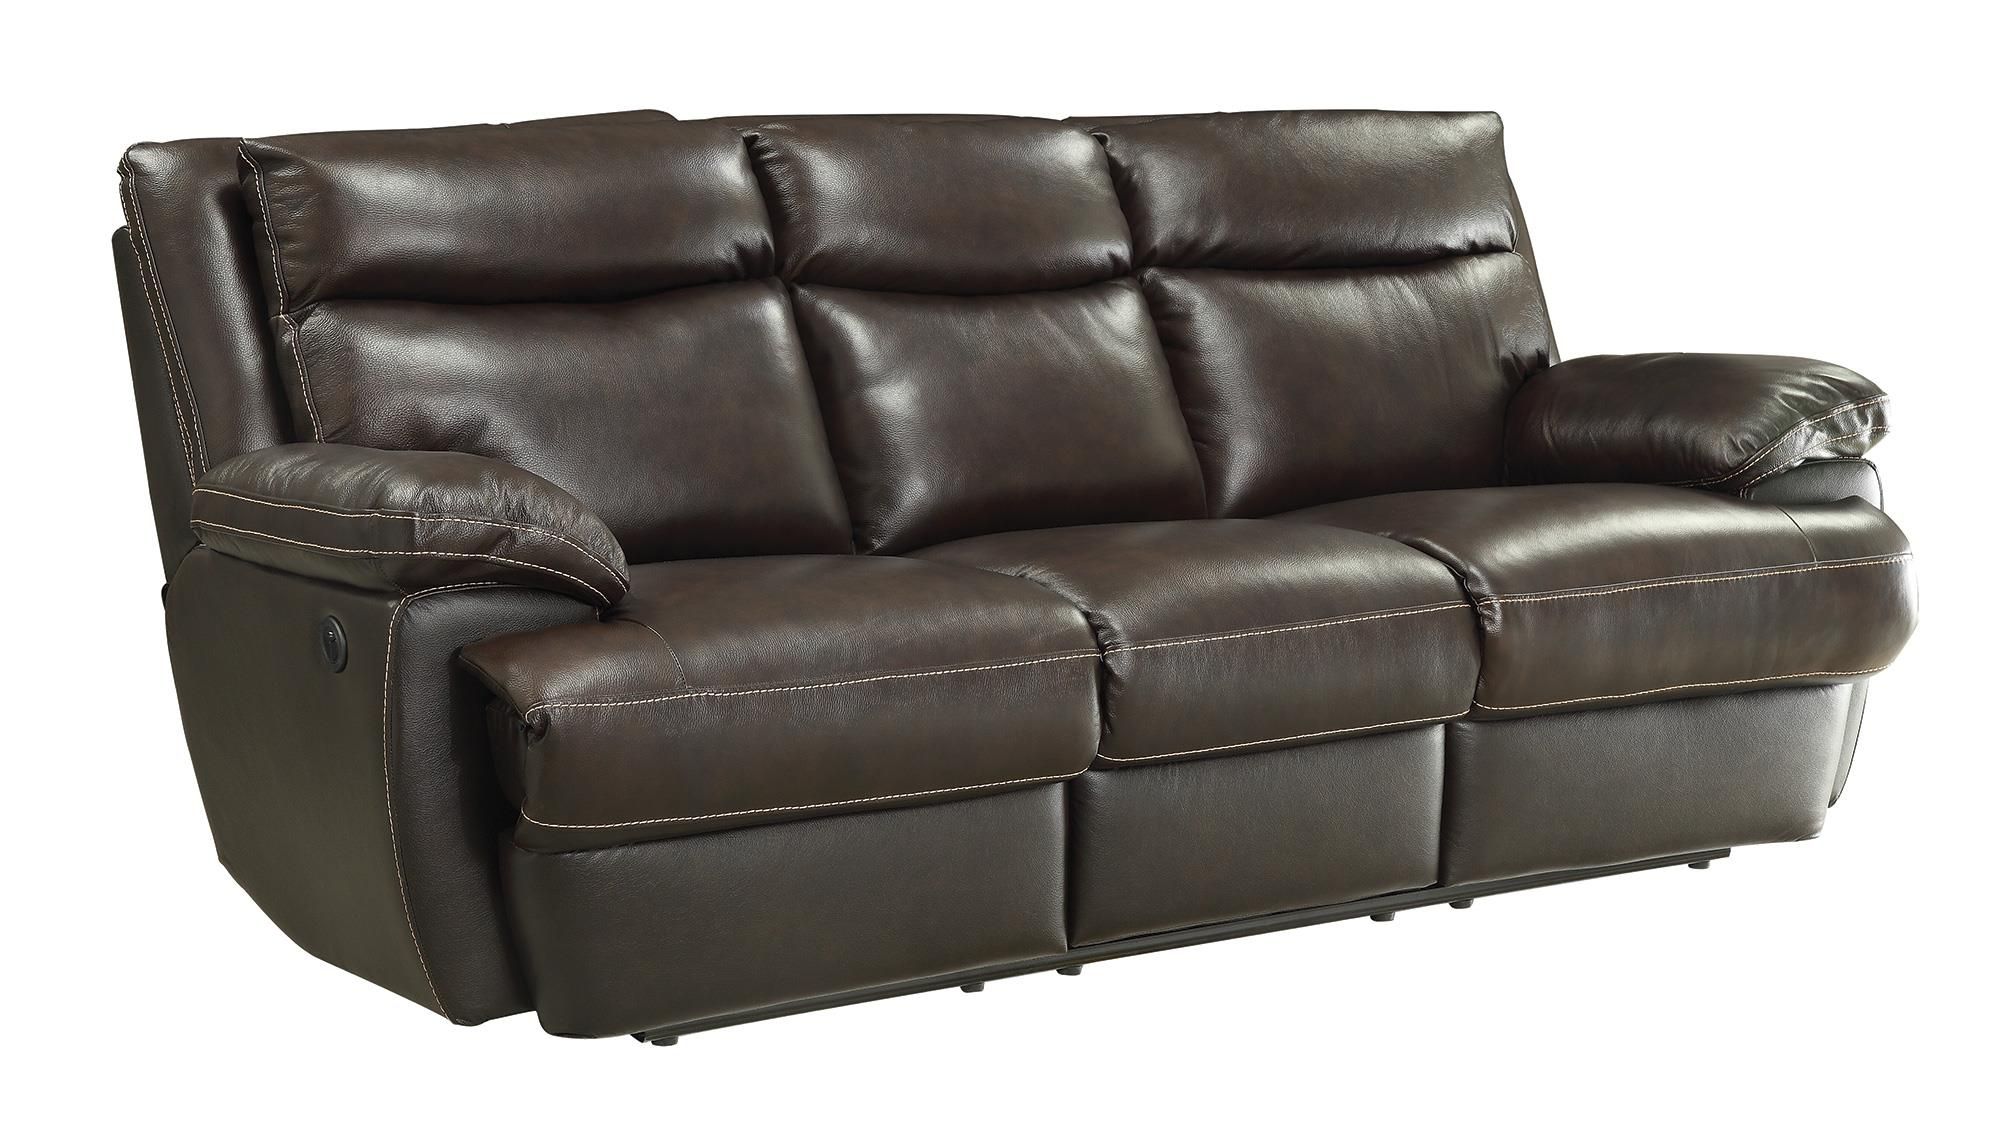 Macpherson Casual Reclining Sofa With Usb Charging Ports | Quality Regarding Espresso Faux Leather Ac And Usb Ottomans (View 5 of 20)